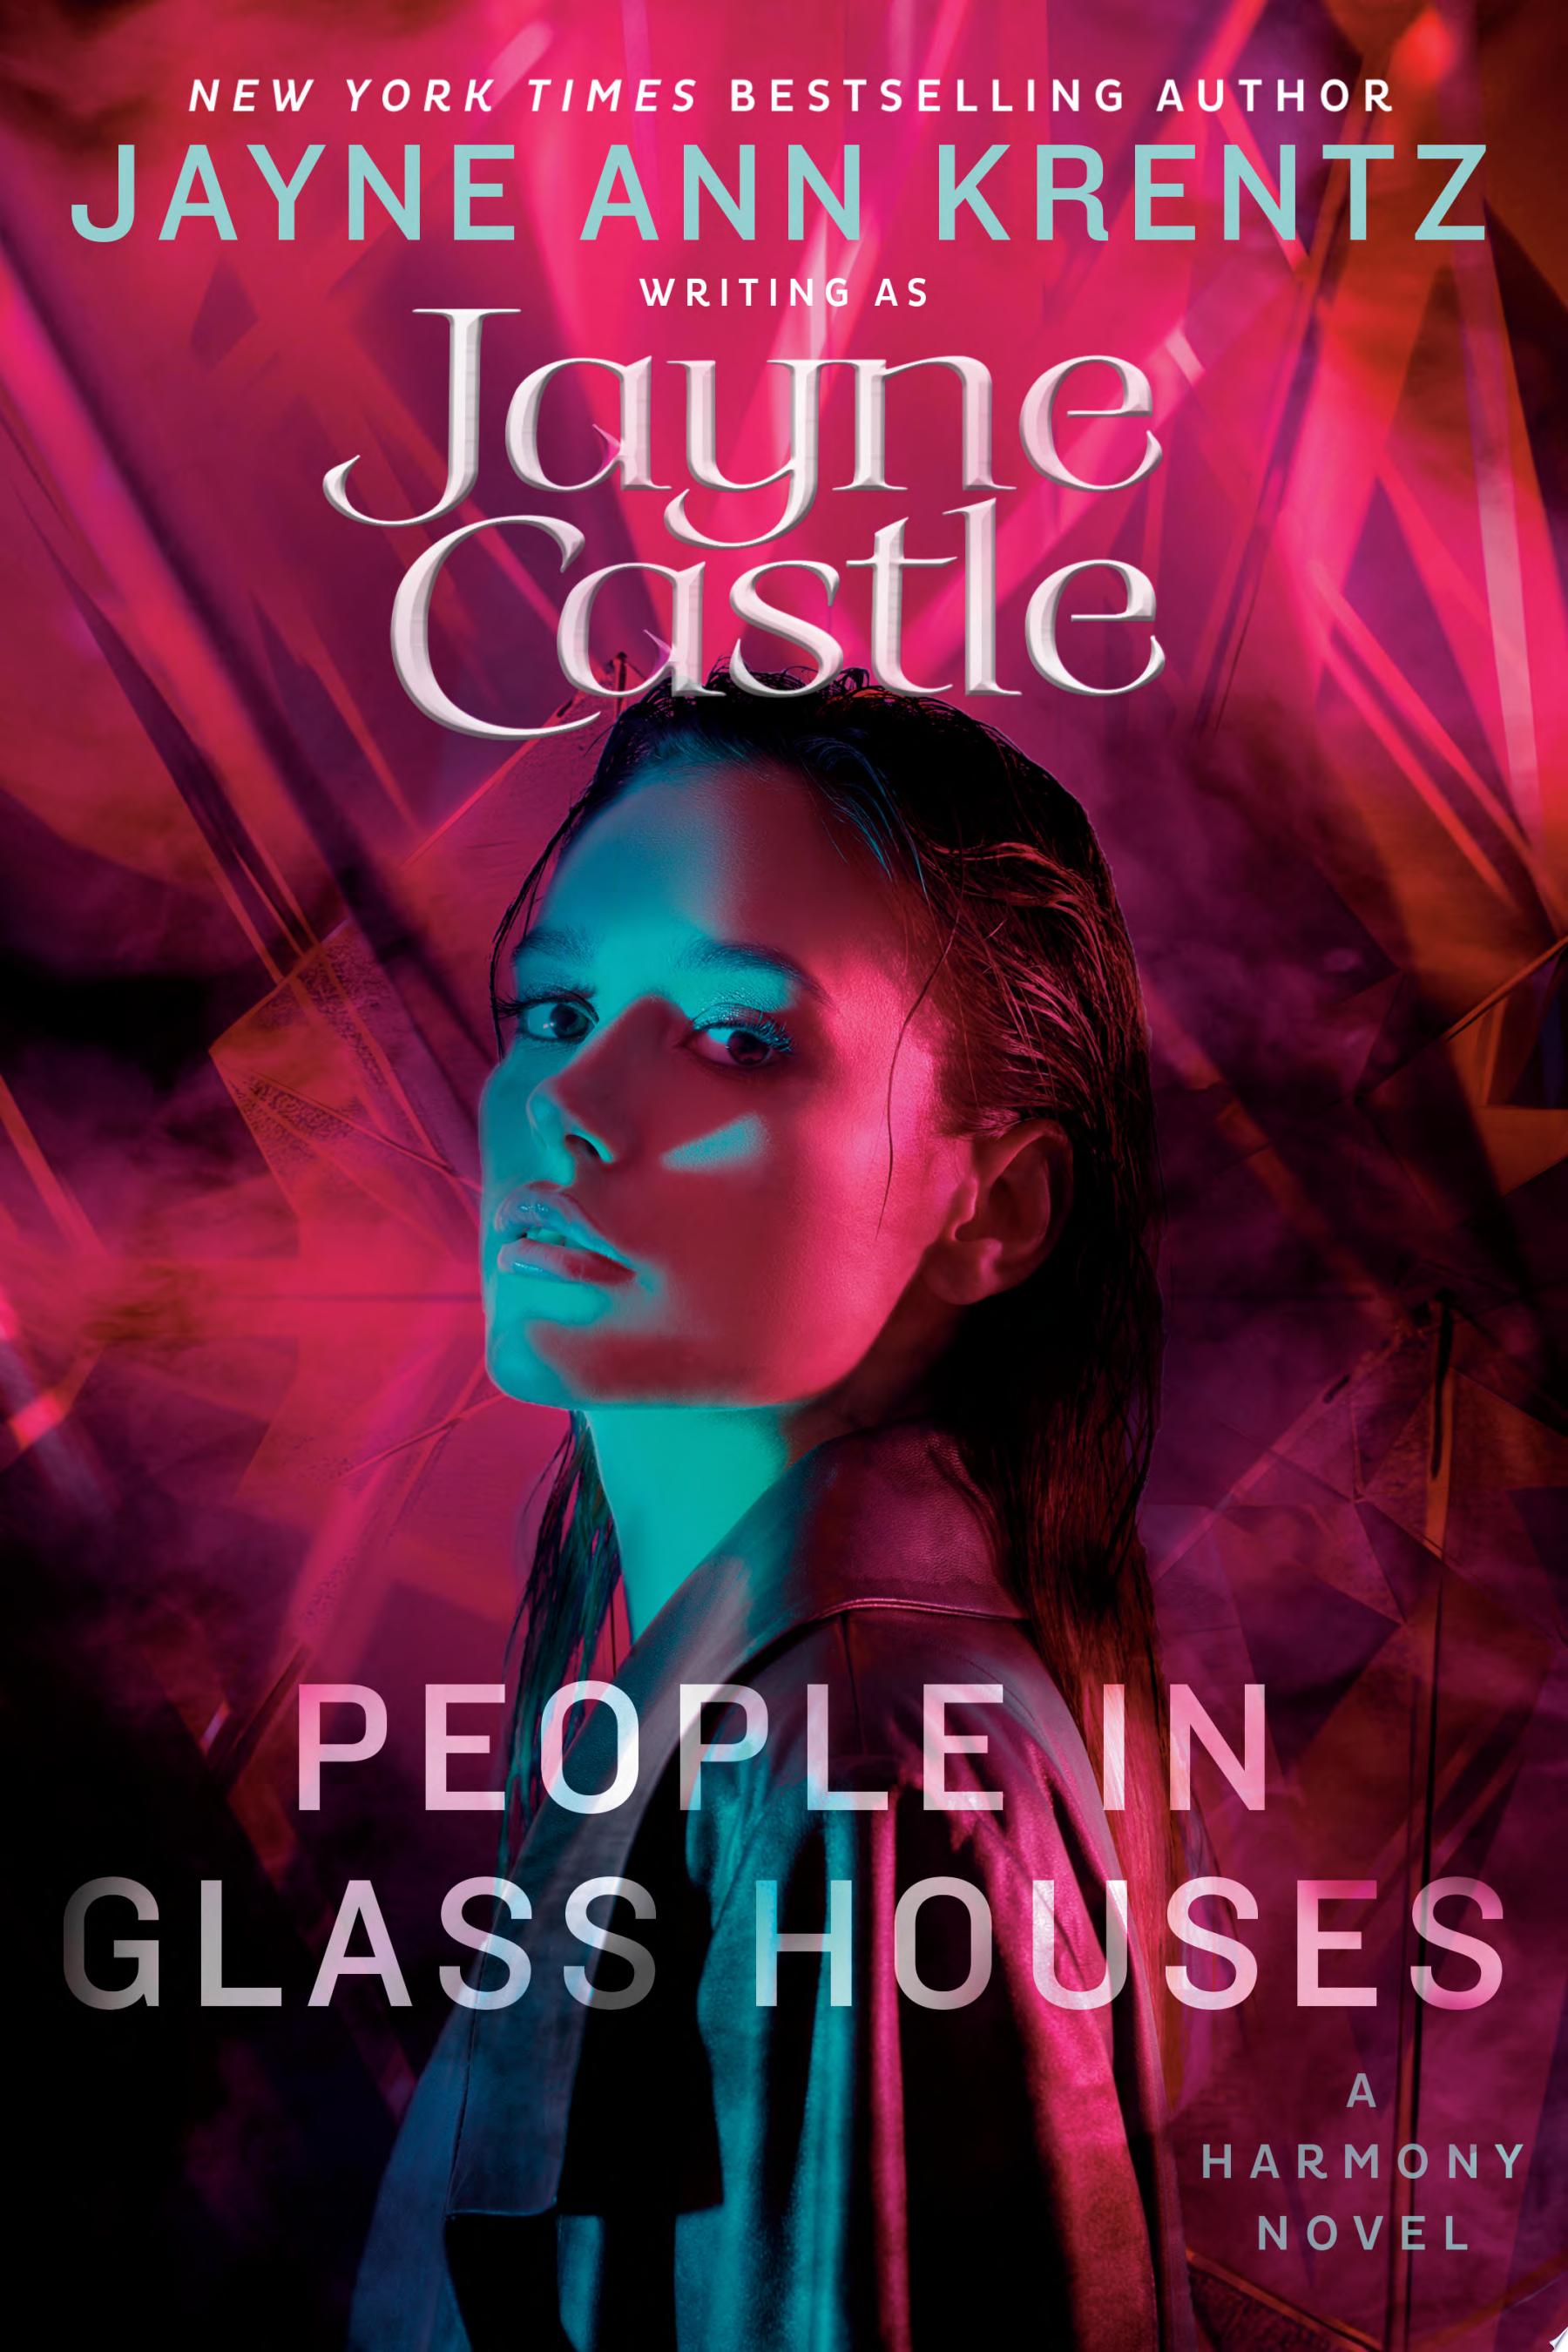 Image for "People in Glass Houses" by  Jayne Castle